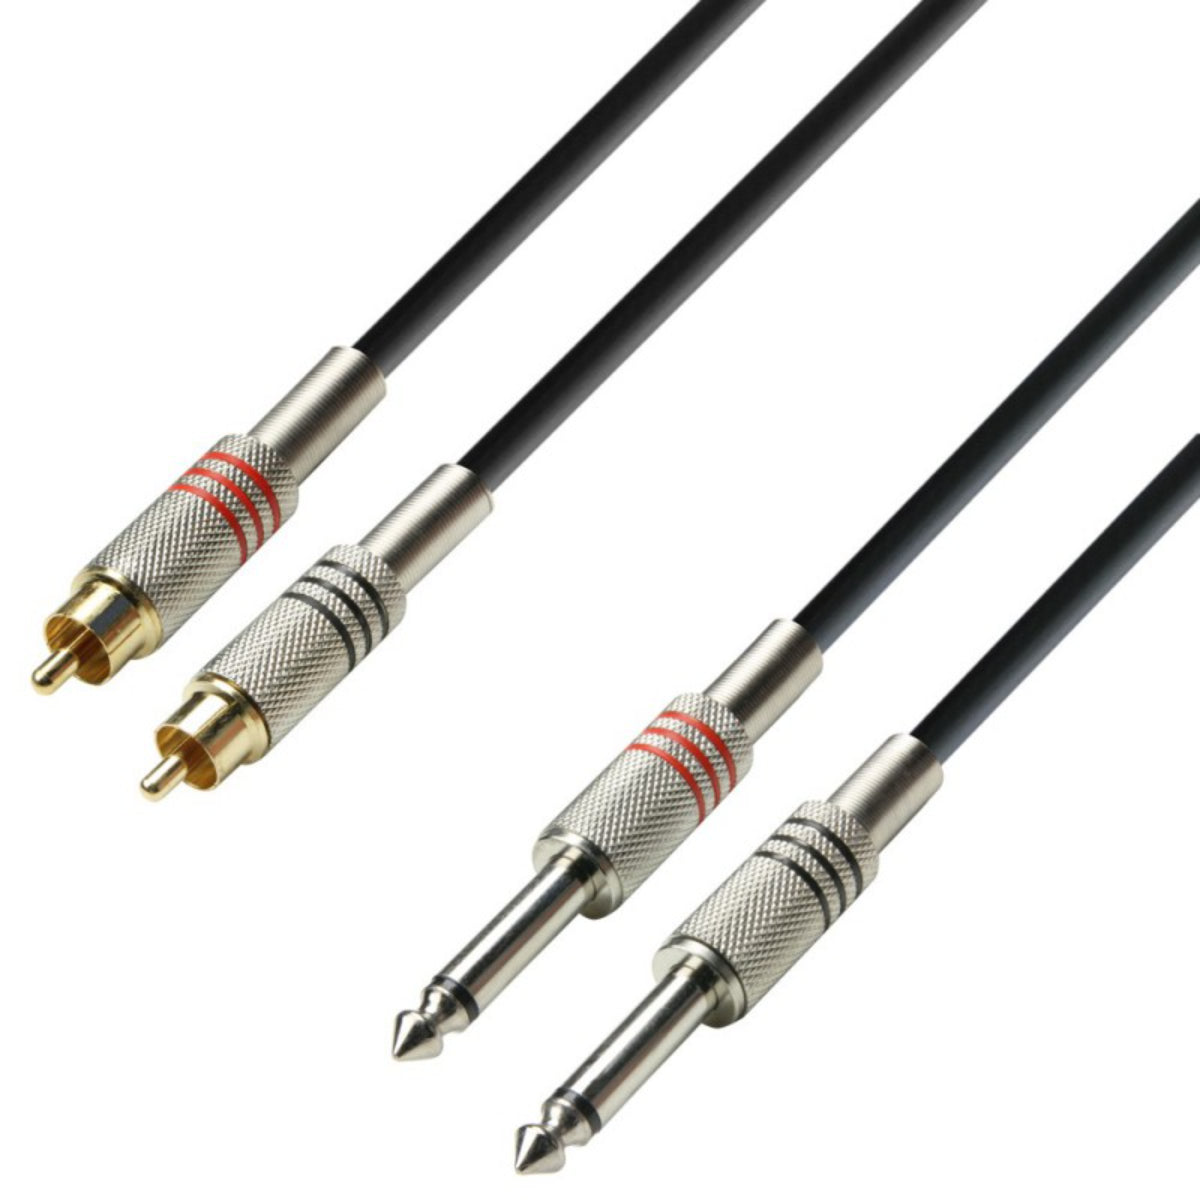 Adam Hall Cables K3 TPC 0300 - Audio Cable 2 x RCA male to 2 x 6.3mm J